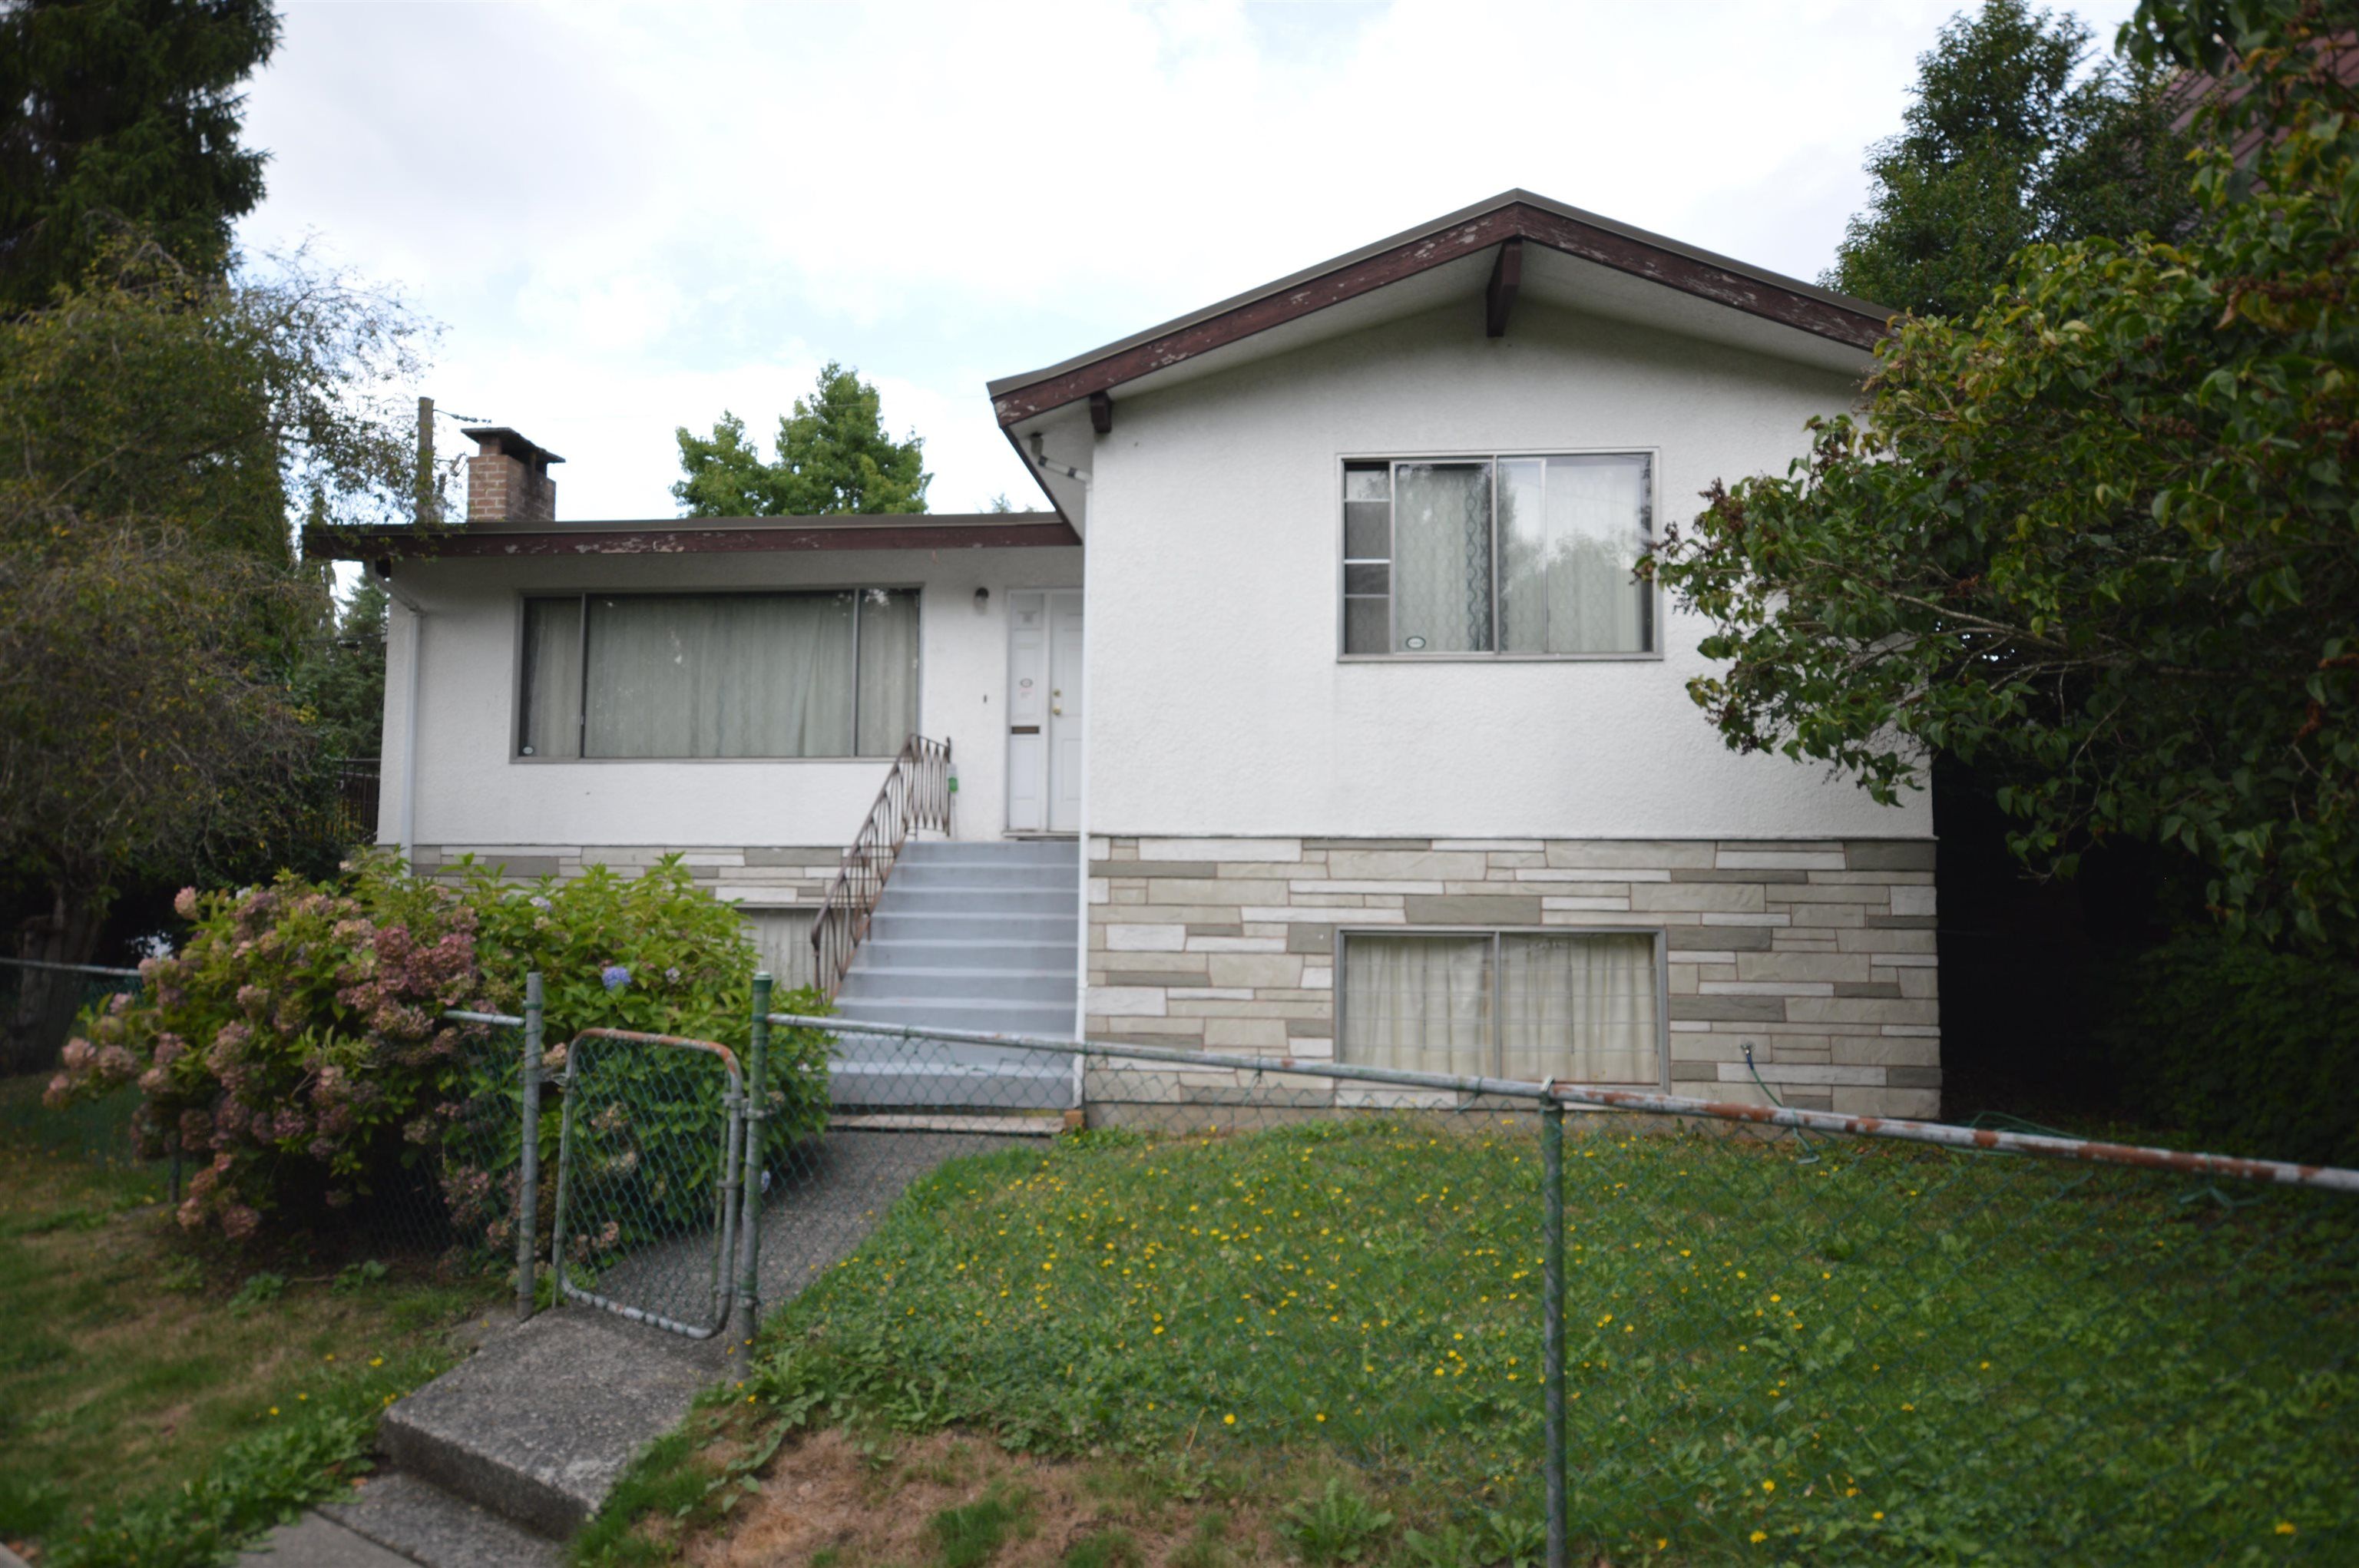 I have sold a property at 2219 GRANDVIEW HWY N in Vancouver
